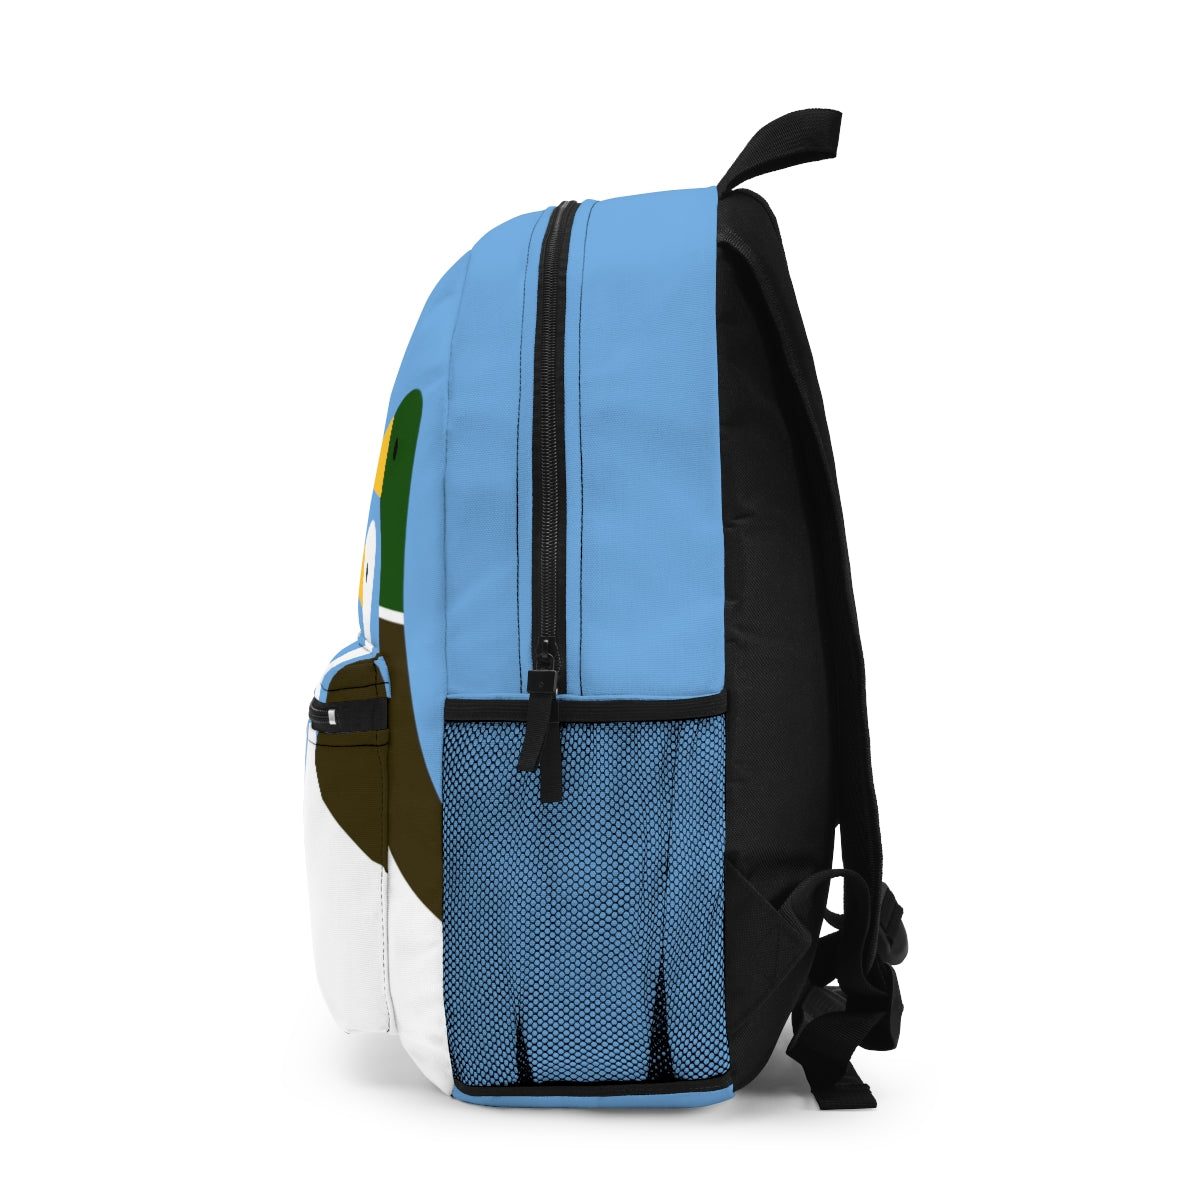 Bring the Ducks with you - light blue - Backpack